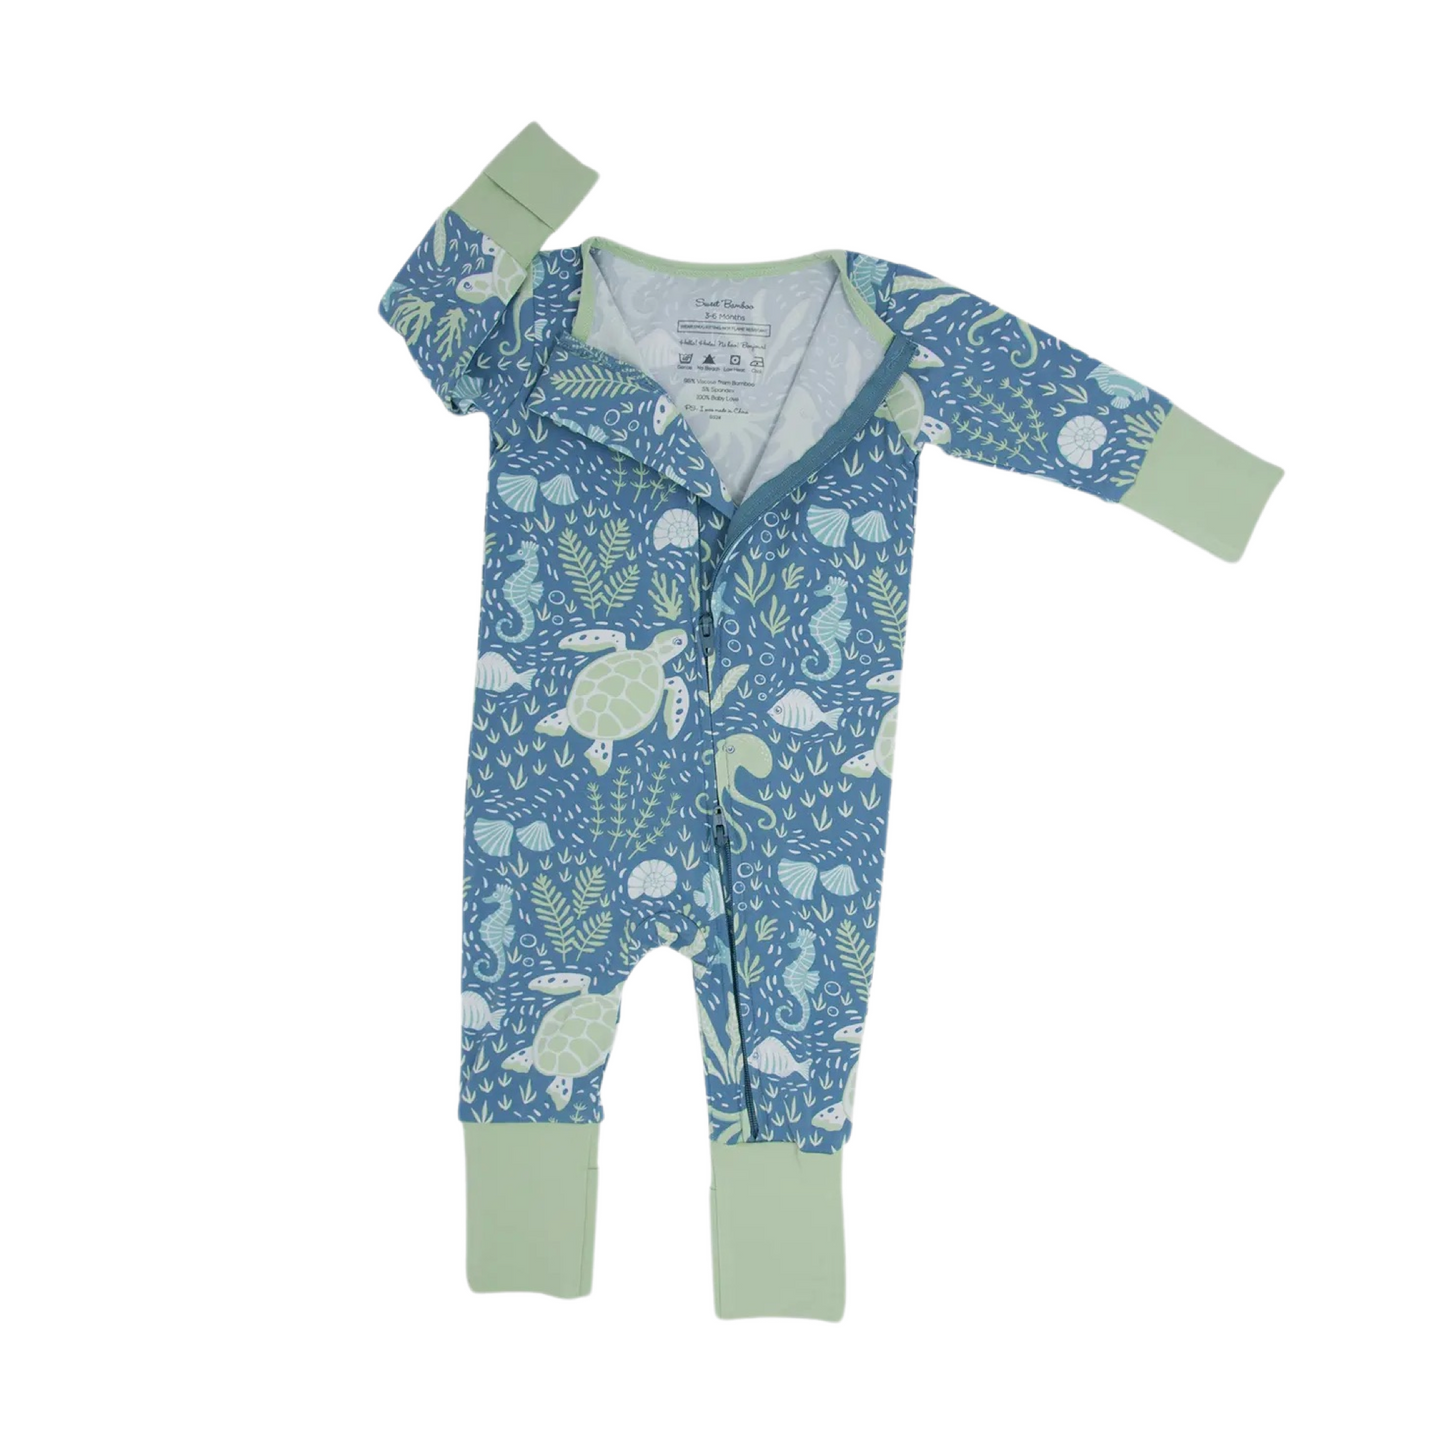 Sweet 𝓑𝓪𝓶𝓫𝓸𝓸 Under the Sea Infant Boys Convertible Romper